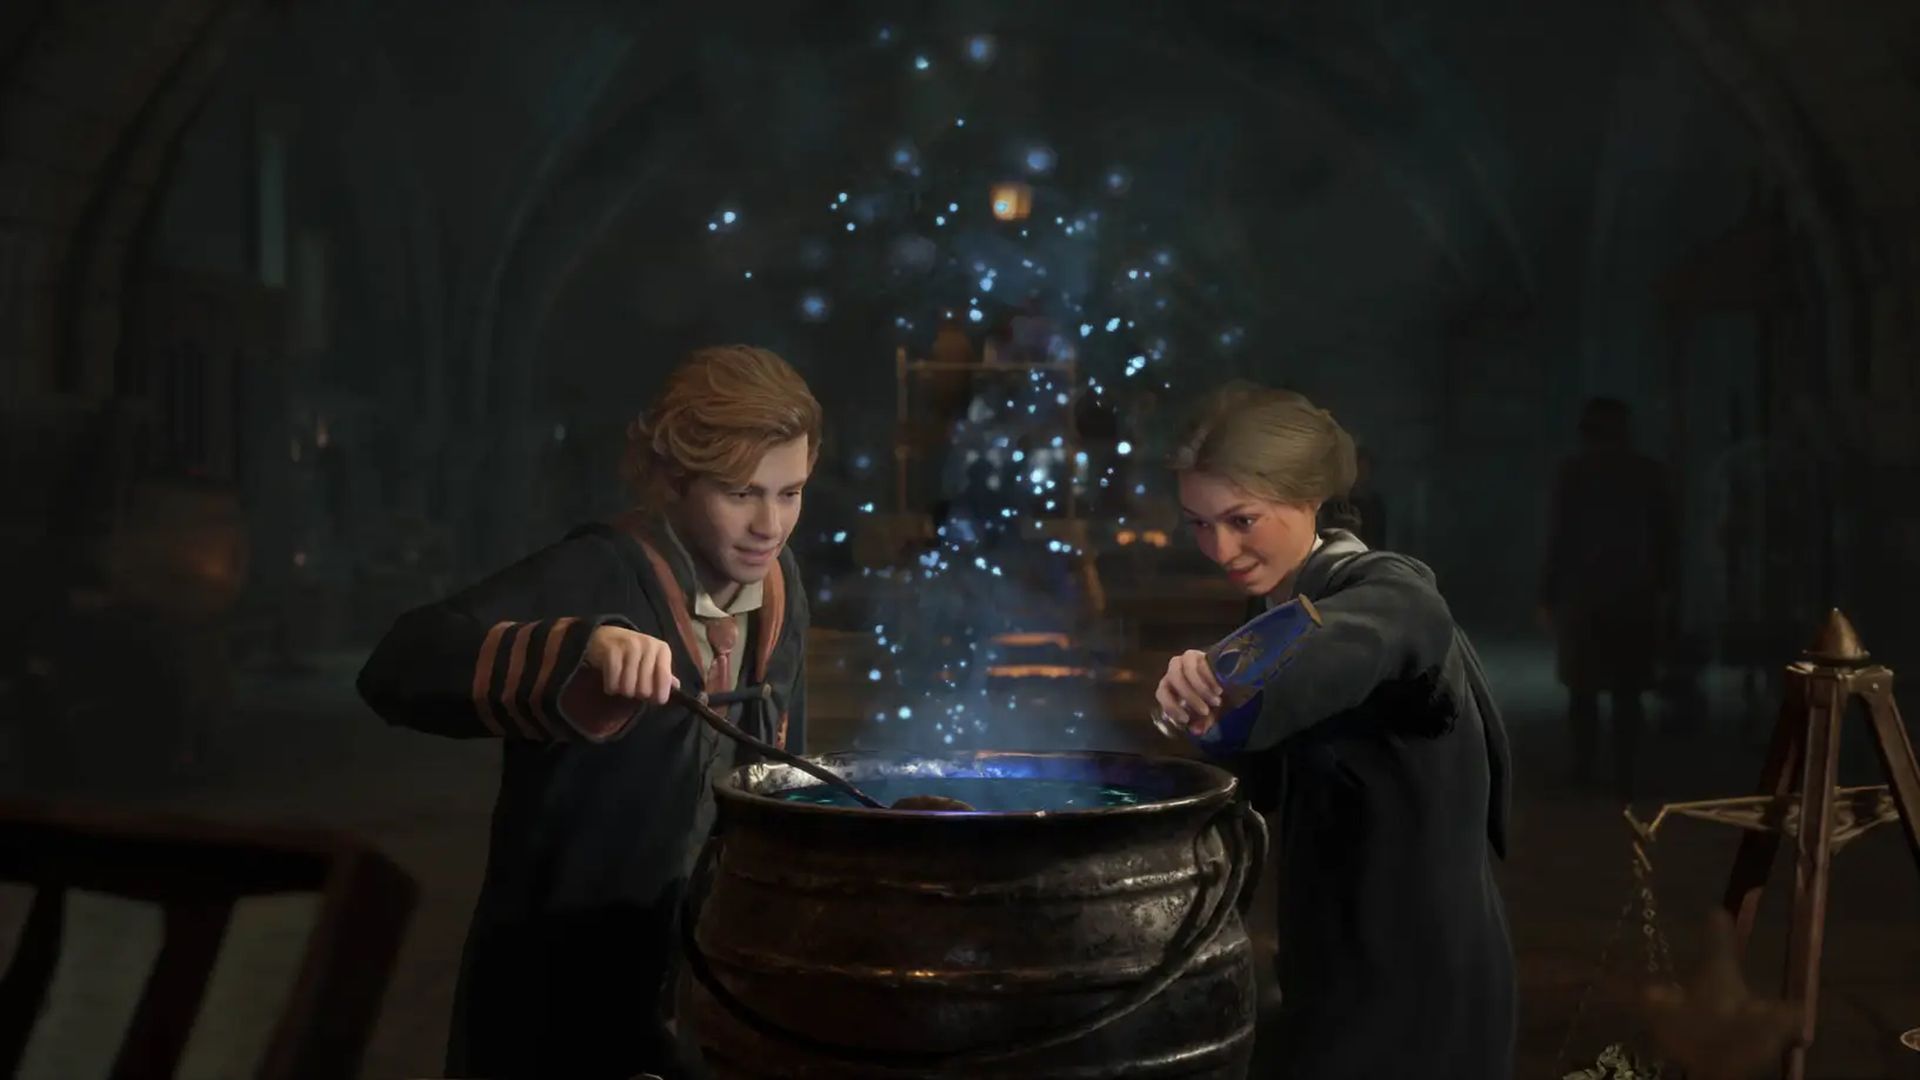 Although Hogwarts Legacy may have finally been released, Portkey Games still has a treat up its sleeve as the new PS5 Hogwarts Legacy controller has been...